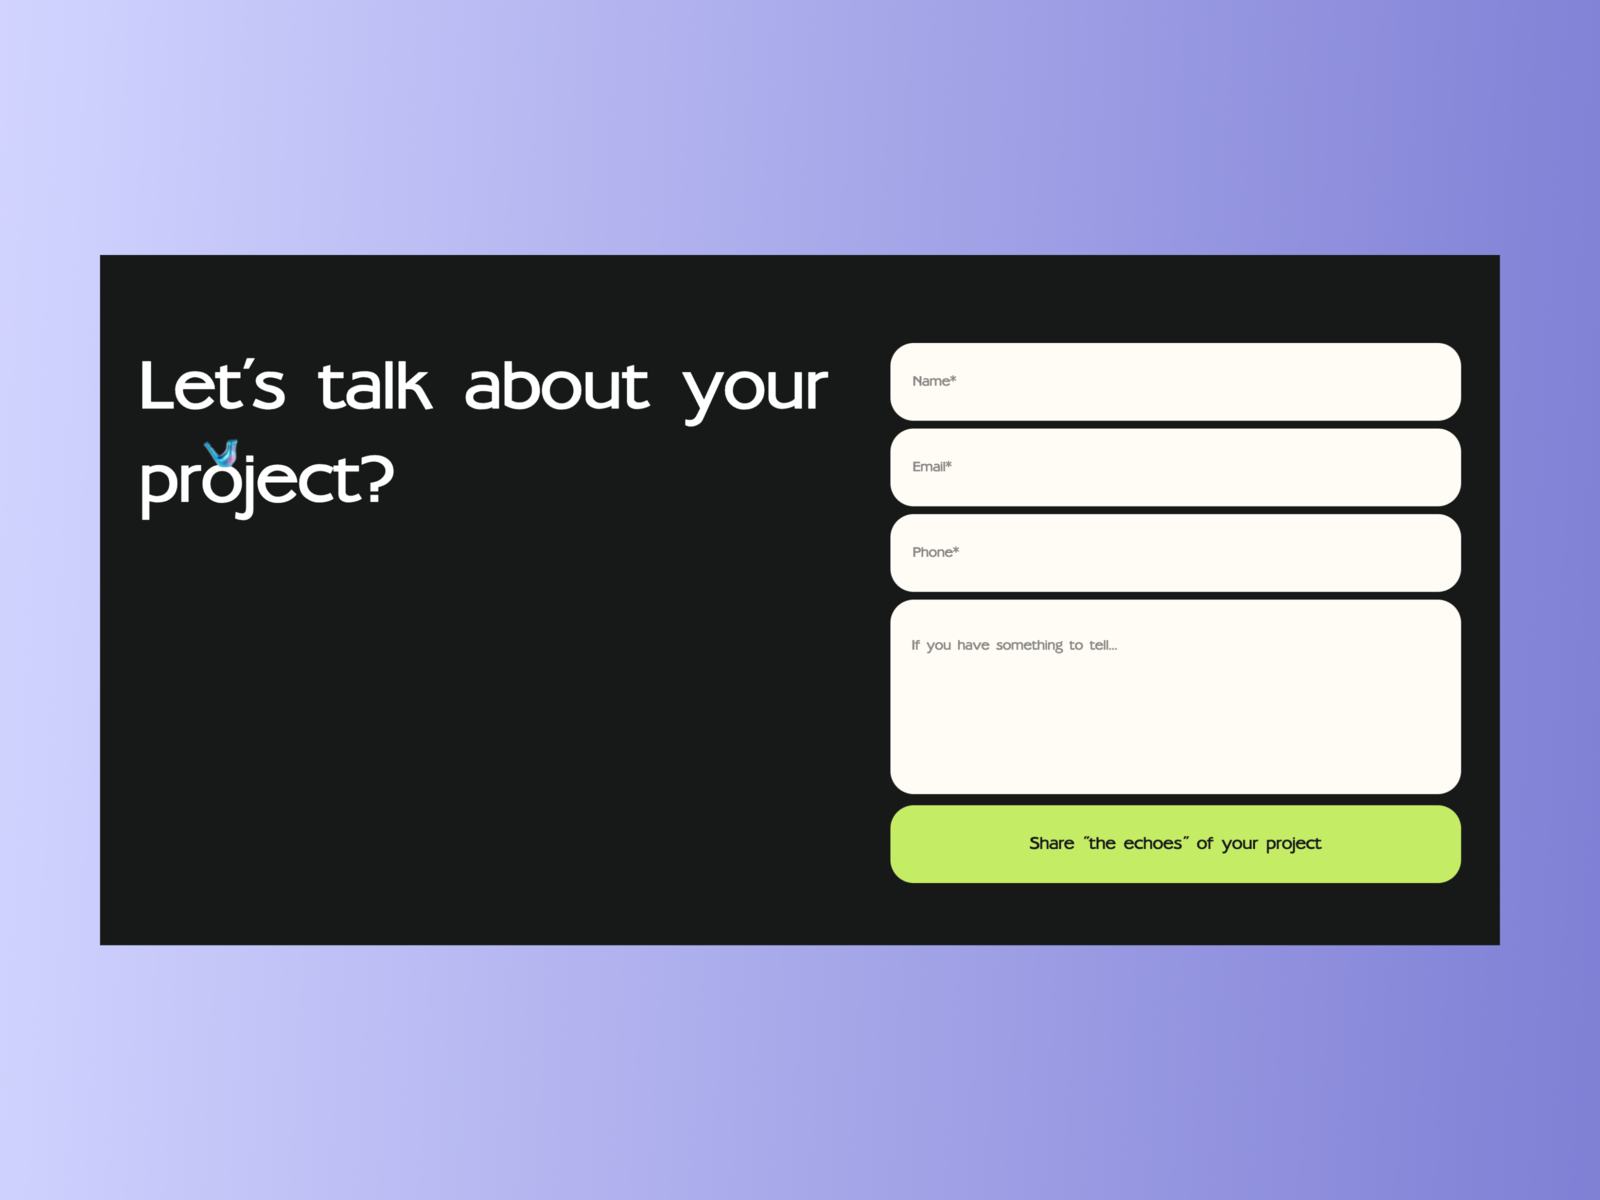 Contact form in footer section